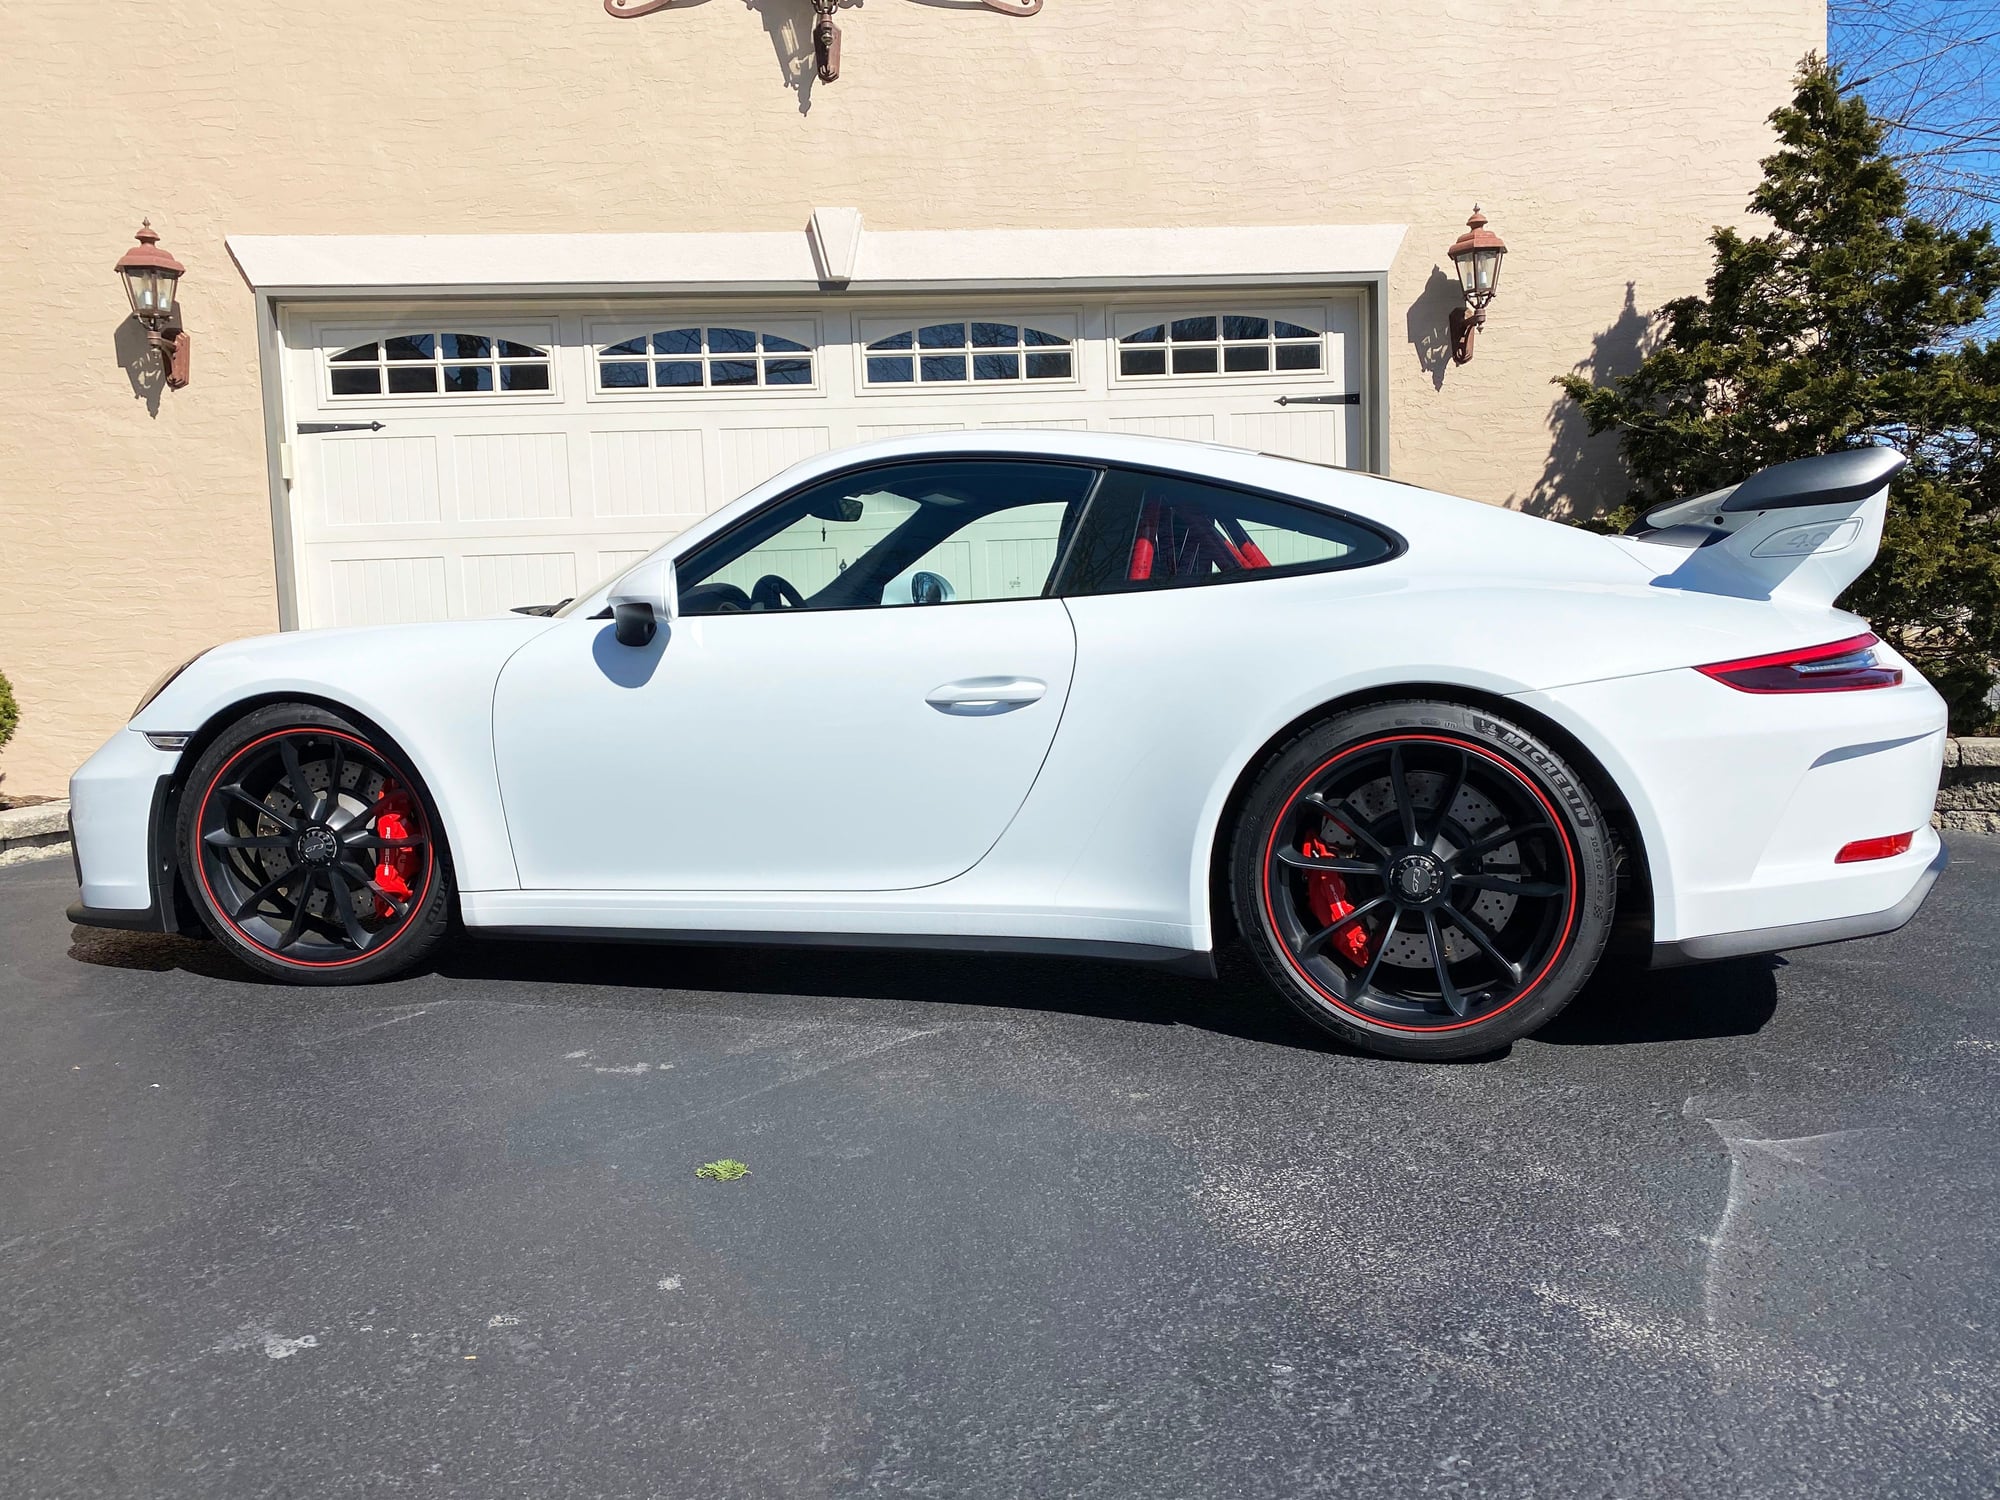 2018 Porsche GT3 - 2018 PORSCHE GT3 - MANUAL - WHITE - 18 WAY SEATS - Used - VIN WP0AC2A93JS177085 - 4,853 Miles - 6 cyl - 2WD - Manual - Coupe - White - Reading, PA 19606, United States